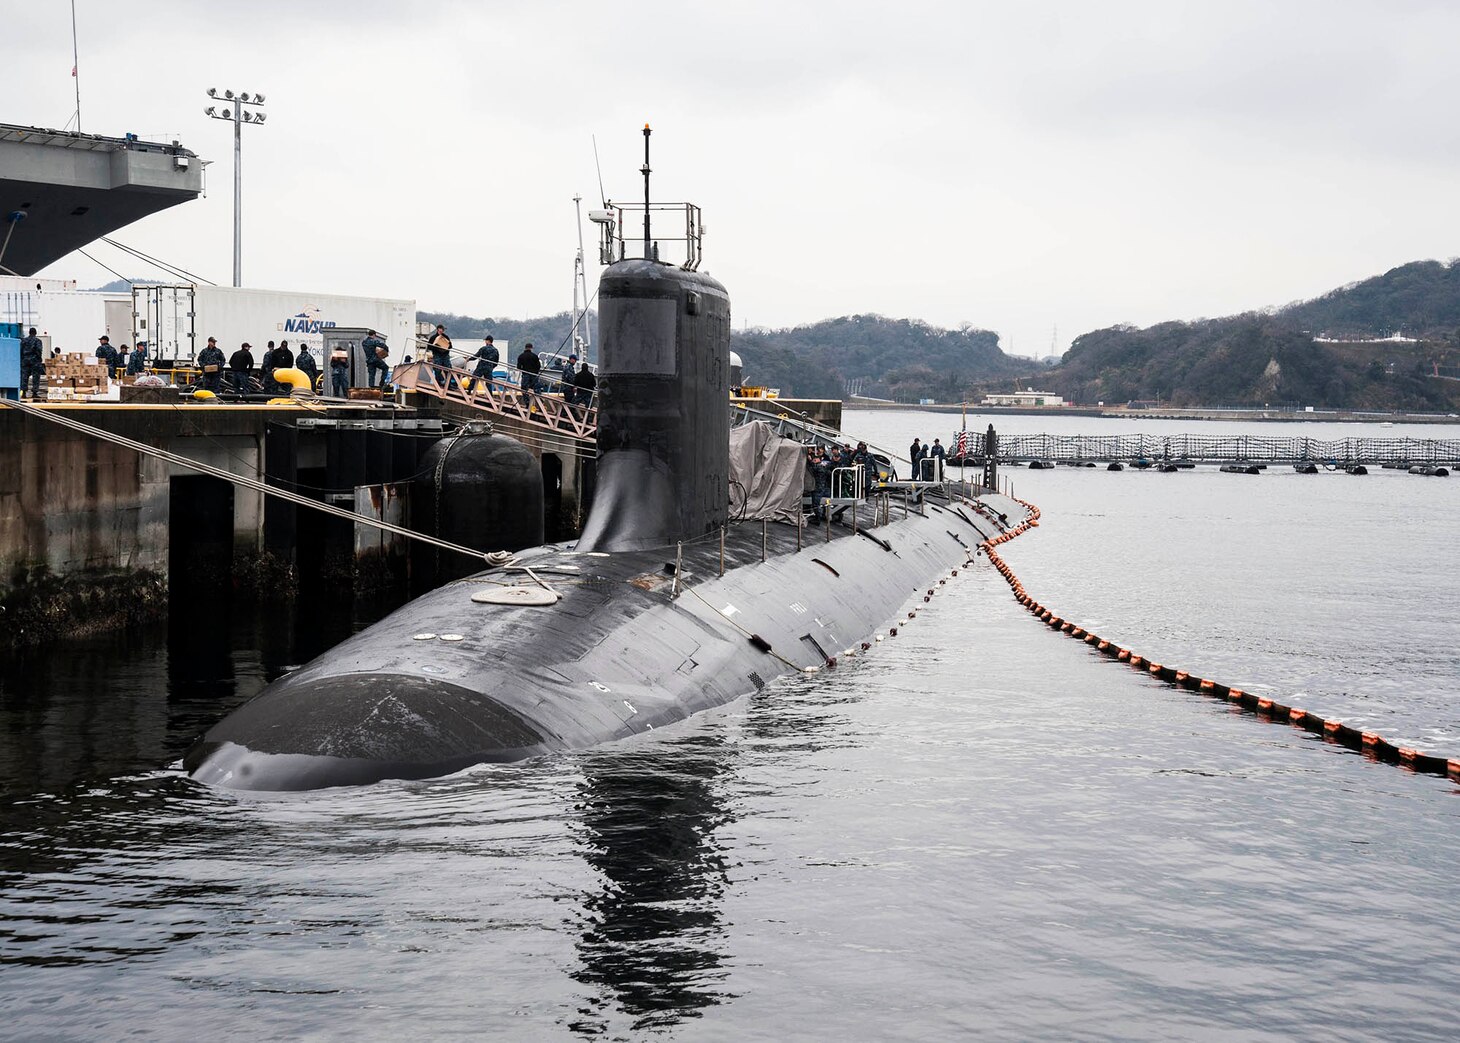 160311-N-ED185-005
FLEET ACTIVITIES YOKOSUKA, Japan -- The Virginia-class attack submarine USS Mississippi (SSN 782) is moored at Fleet Activities Yokosuka. Mississippi is visiting Yokosuka for a port visit. U.S. Navy port visits represent an important opportunity to promote stability and security in the Indo-Asia-Pacific region, demonstrate commitment to regional partners and foster relationships. (U.S. Navy photo by Mass Communication Specialist 2nd Class Brian G. Reynolds/Released)
